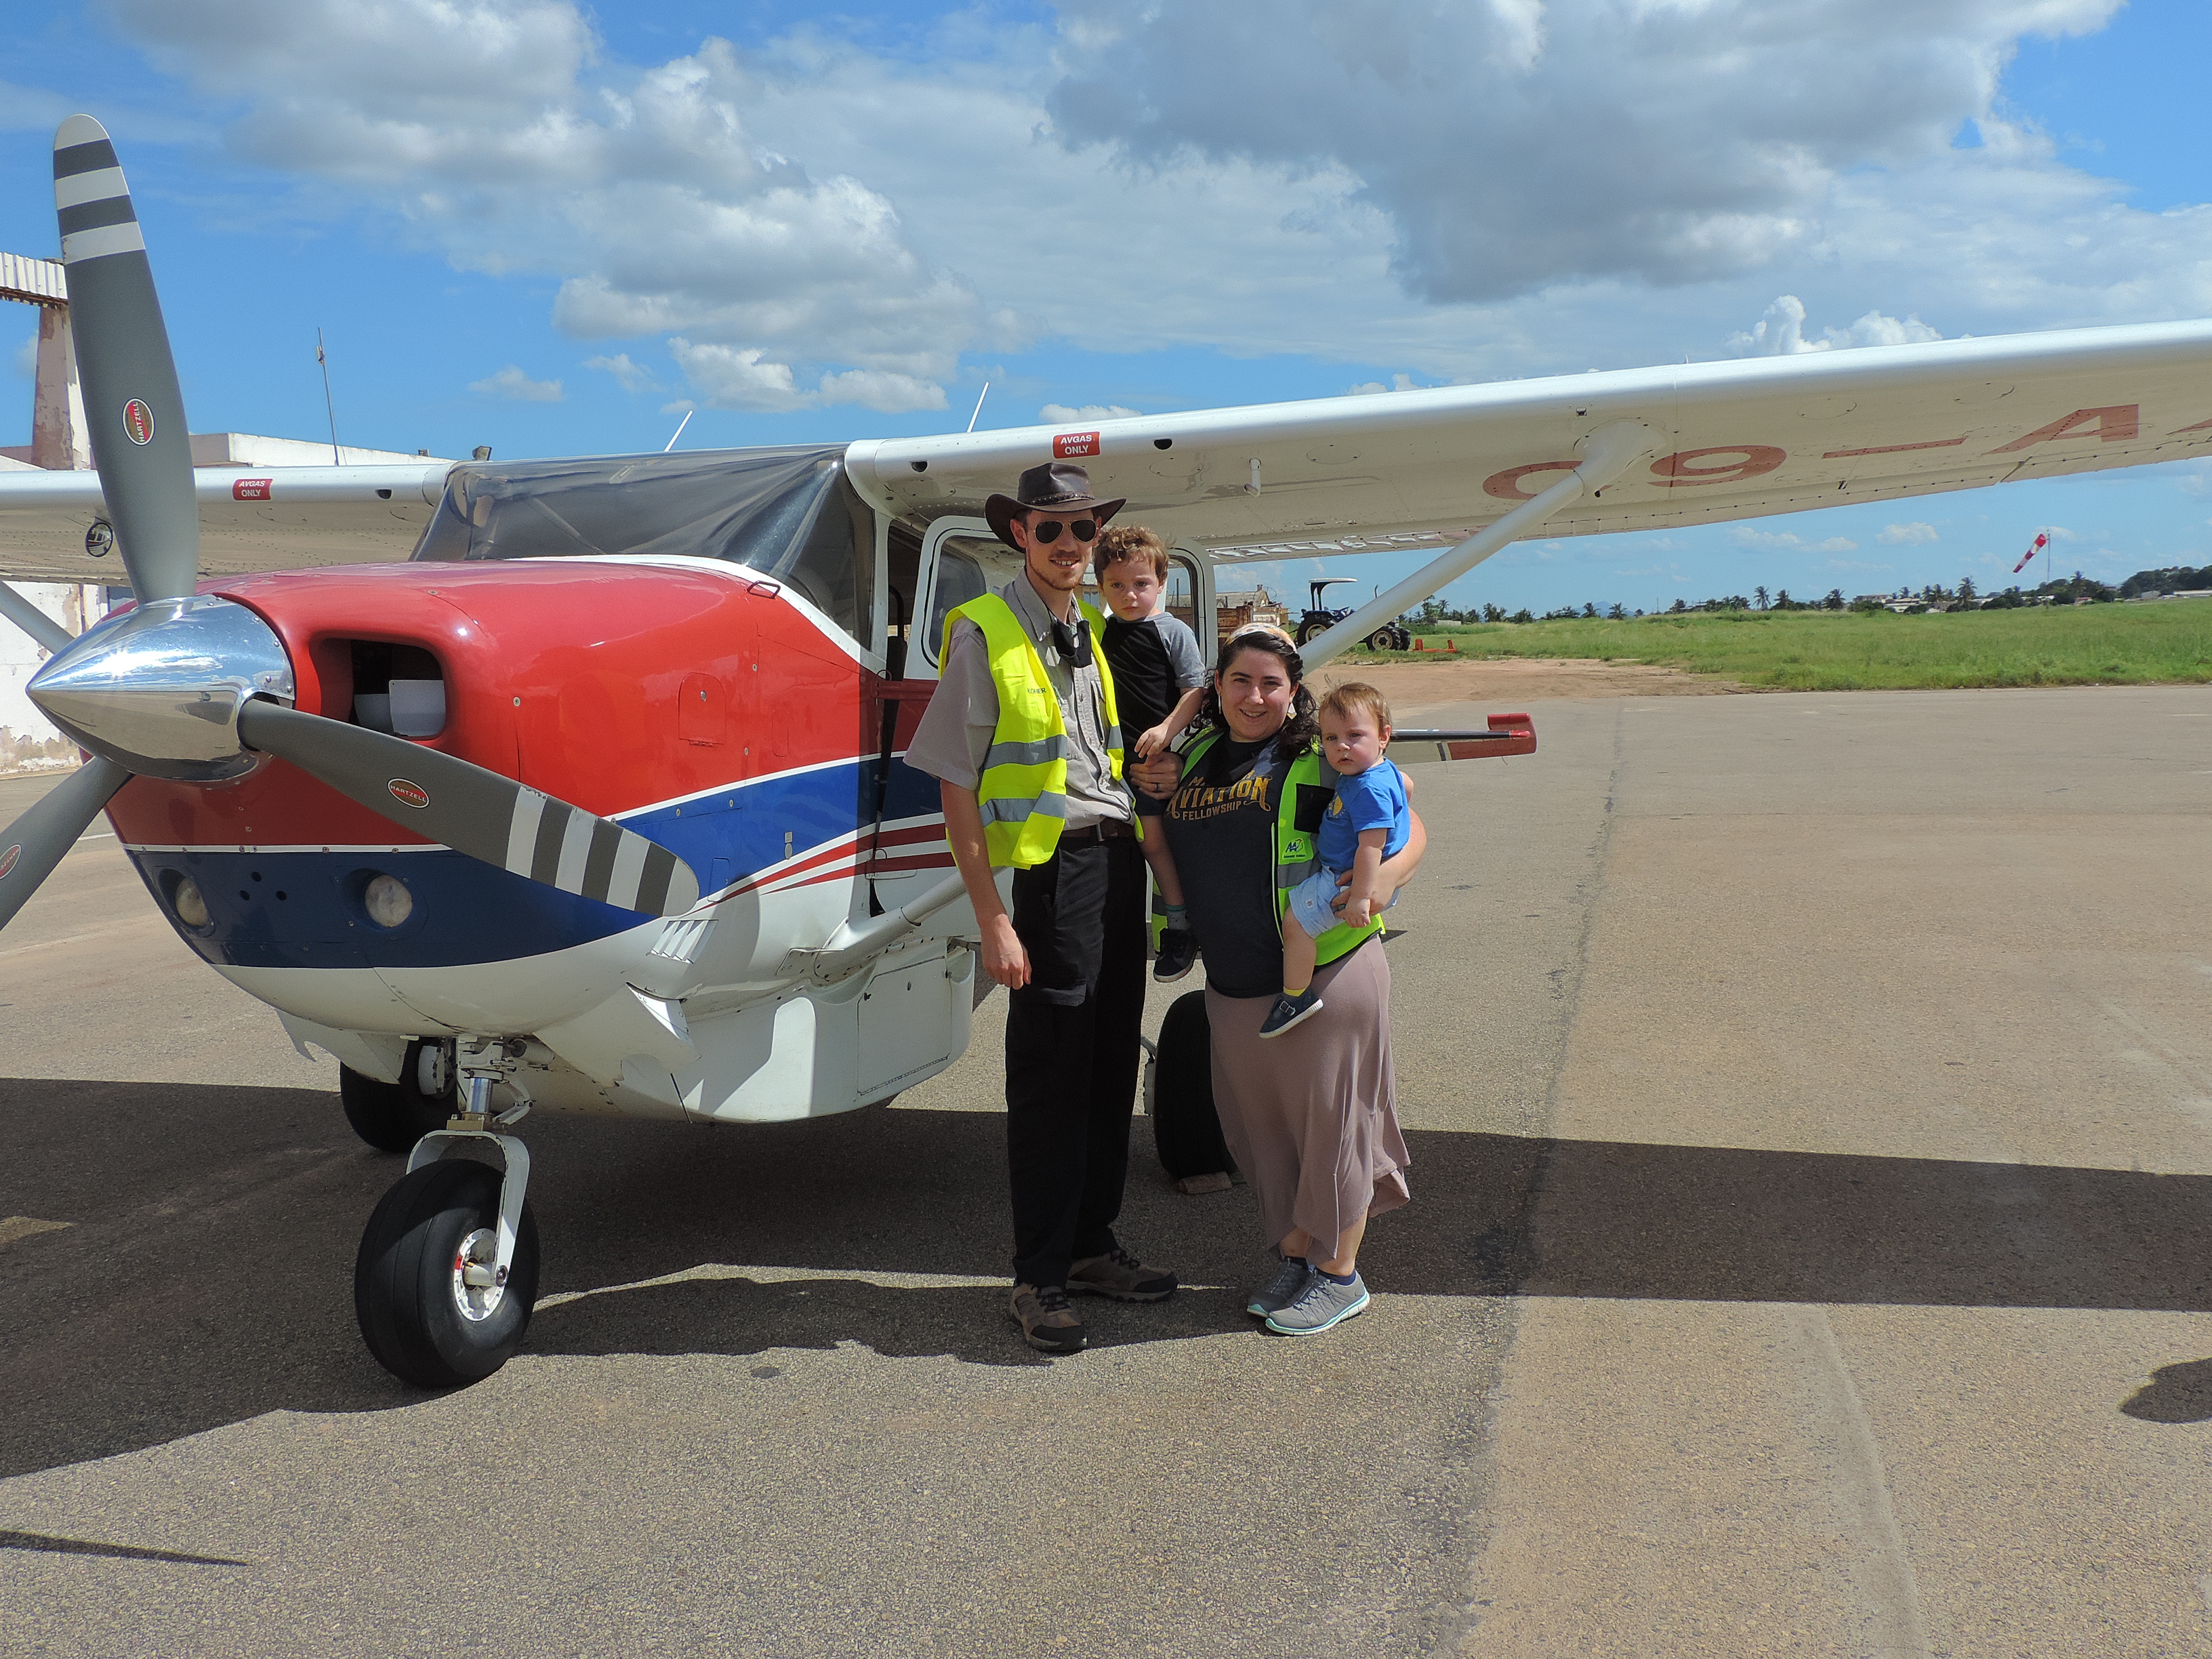 After wrongful detainment, American missionary pilot hopes to continue ministry in Mozambique